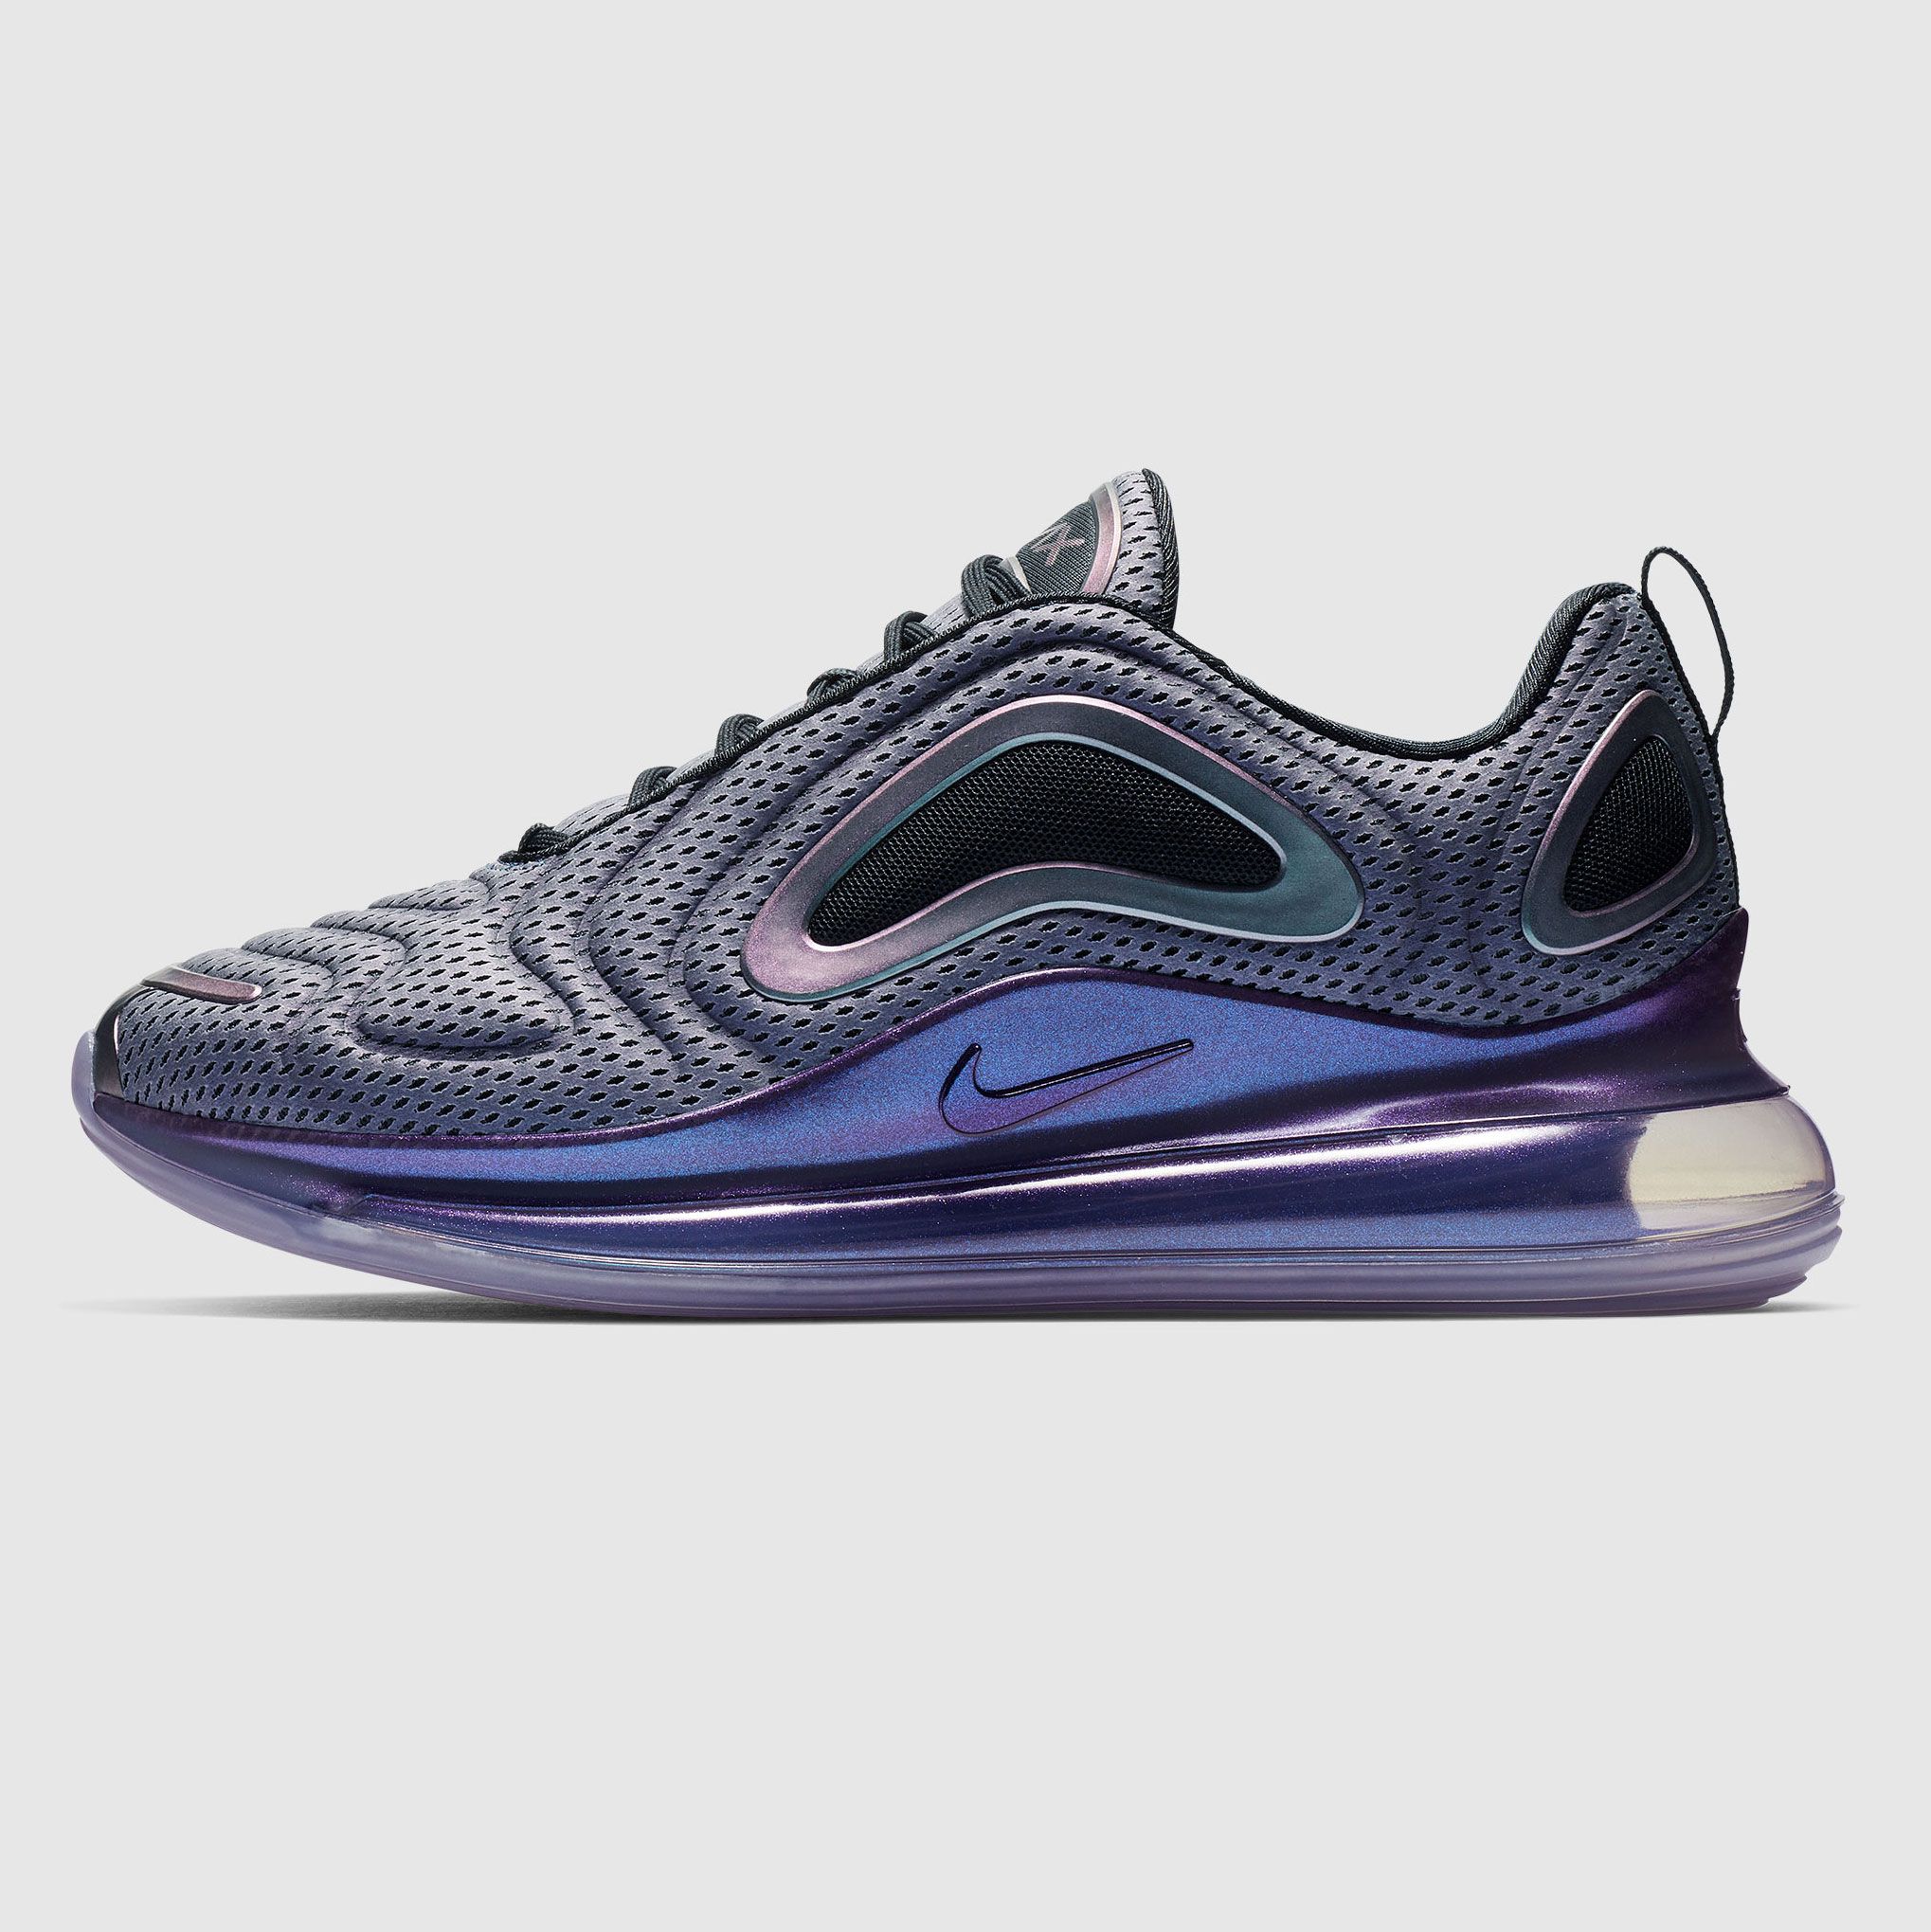 bronce Factibilidad un acreedor Nike's Air Max 720 Just Got Its Full, Official Reveal - Air Max 720 Release  Date